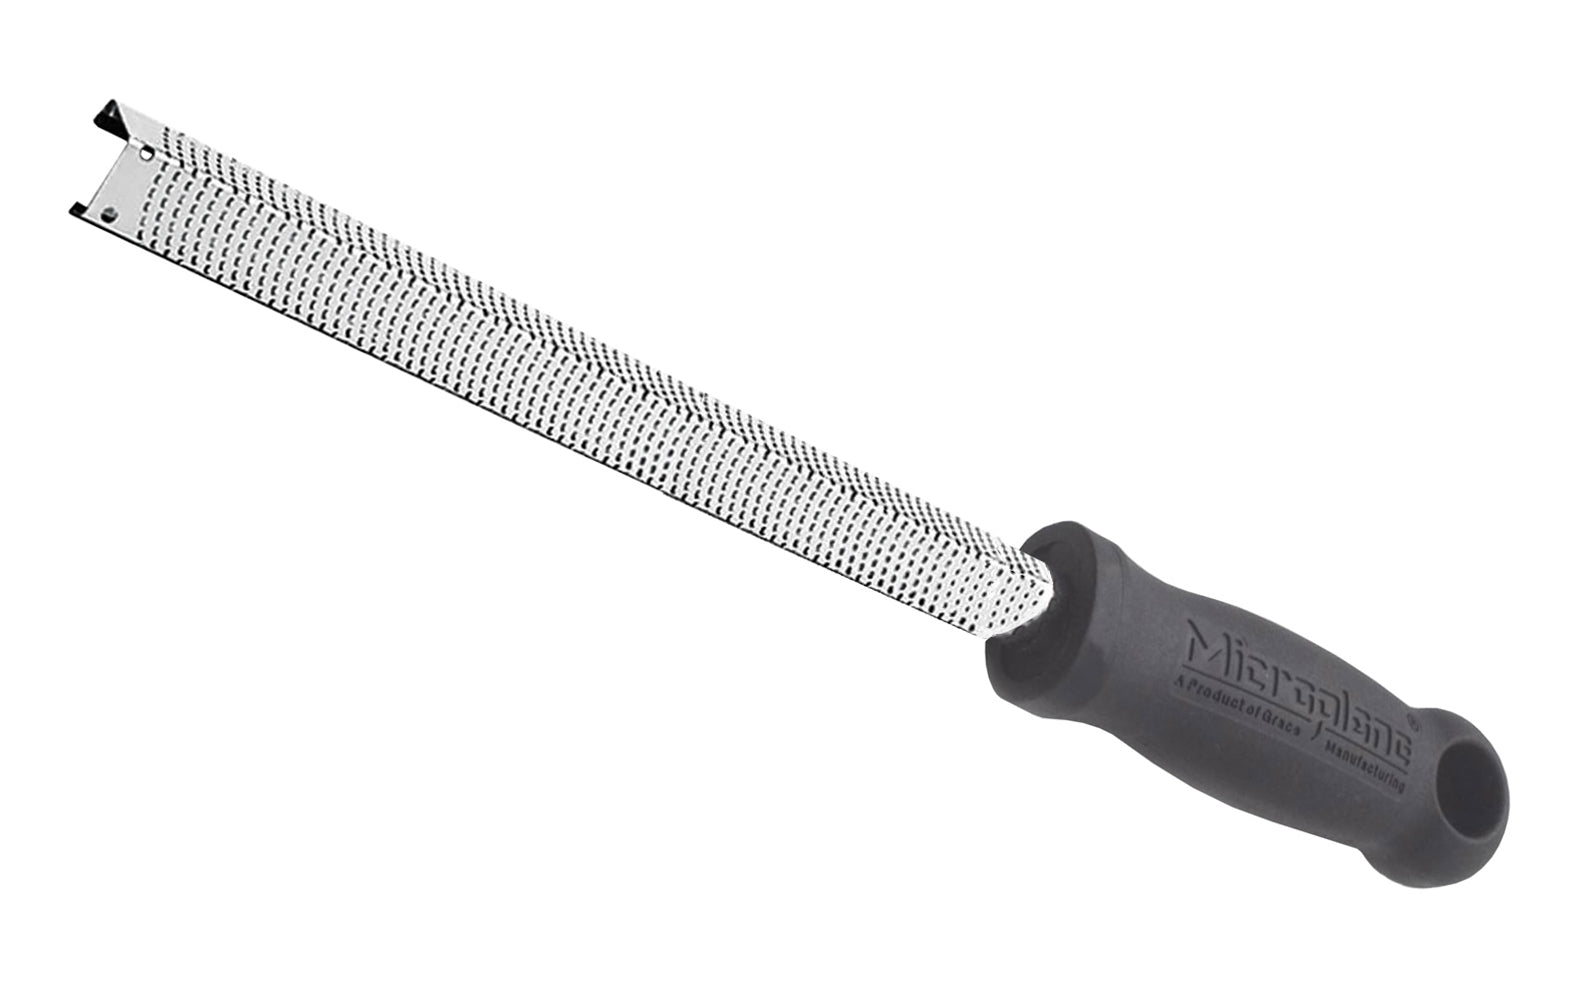 Made in USA - Microplane square blade with Handle - 30012 - Shaving - Wood shaving - This Microplane square rasp with handle is used to enlarge holes & shape surfaces, but cuts much faster & leave a smoother finish than any similar tools. Made from hardened stainless steel - Surform - Grater - 1/2